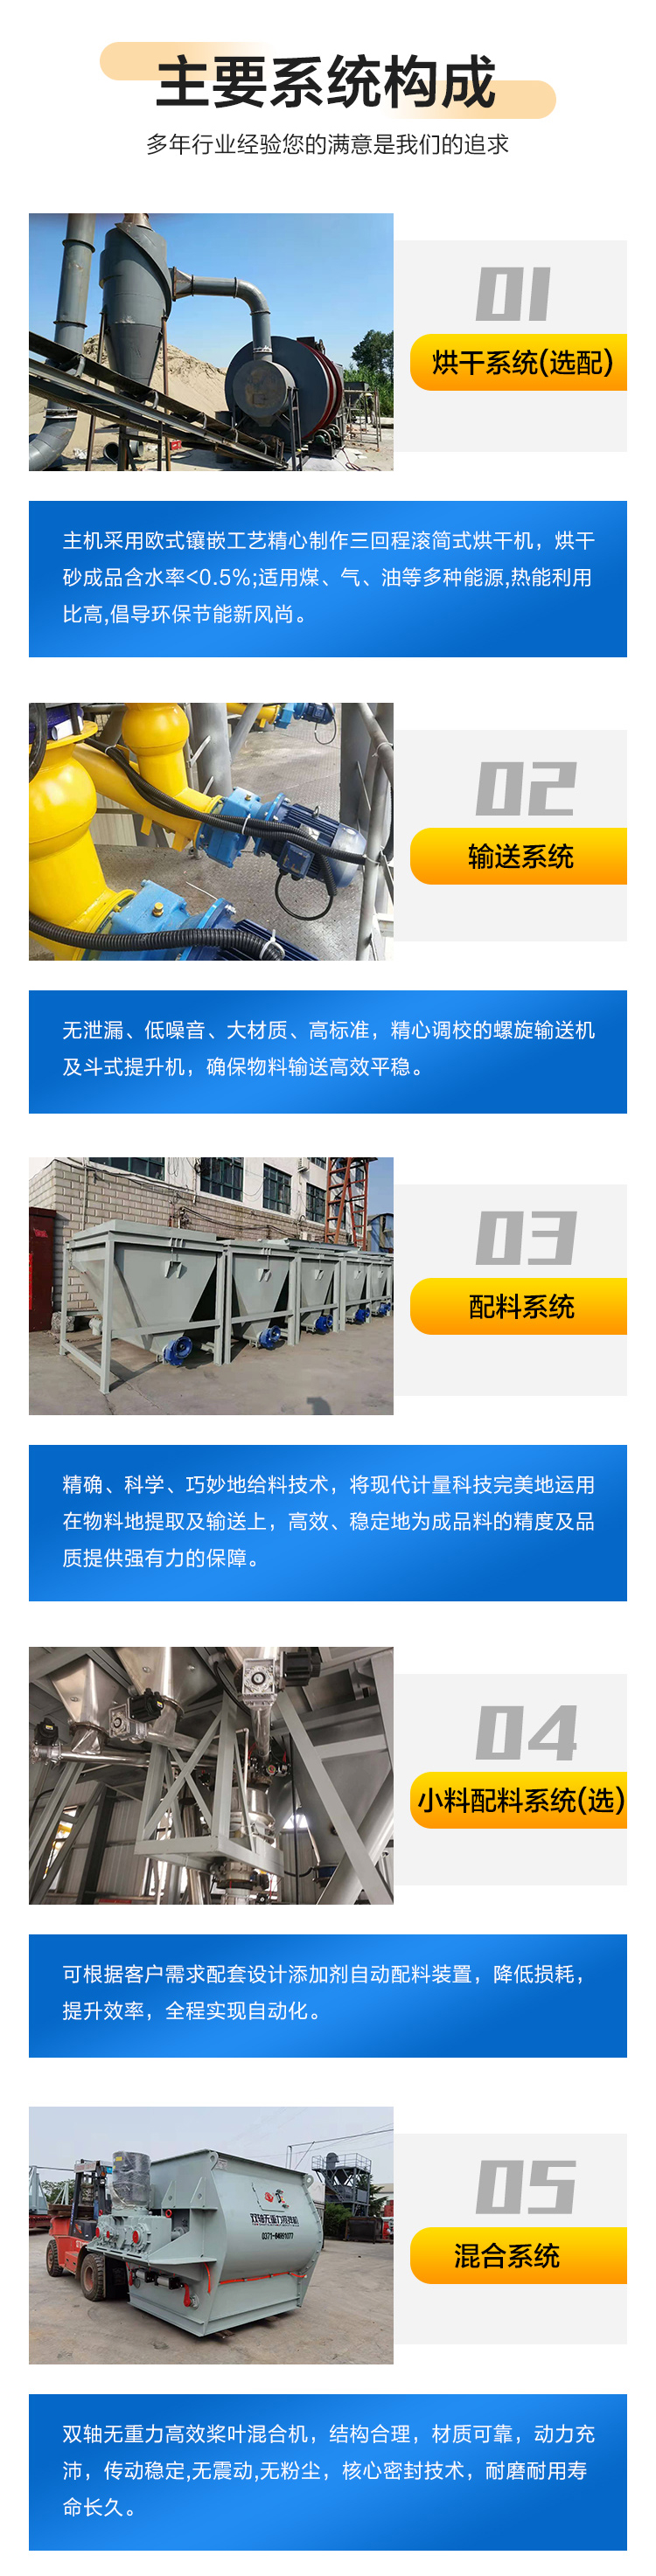 Double axis putty powder mixer equipment, fully automatic dry powder mortar complete equipment, plastering mortar mixer manufacturer